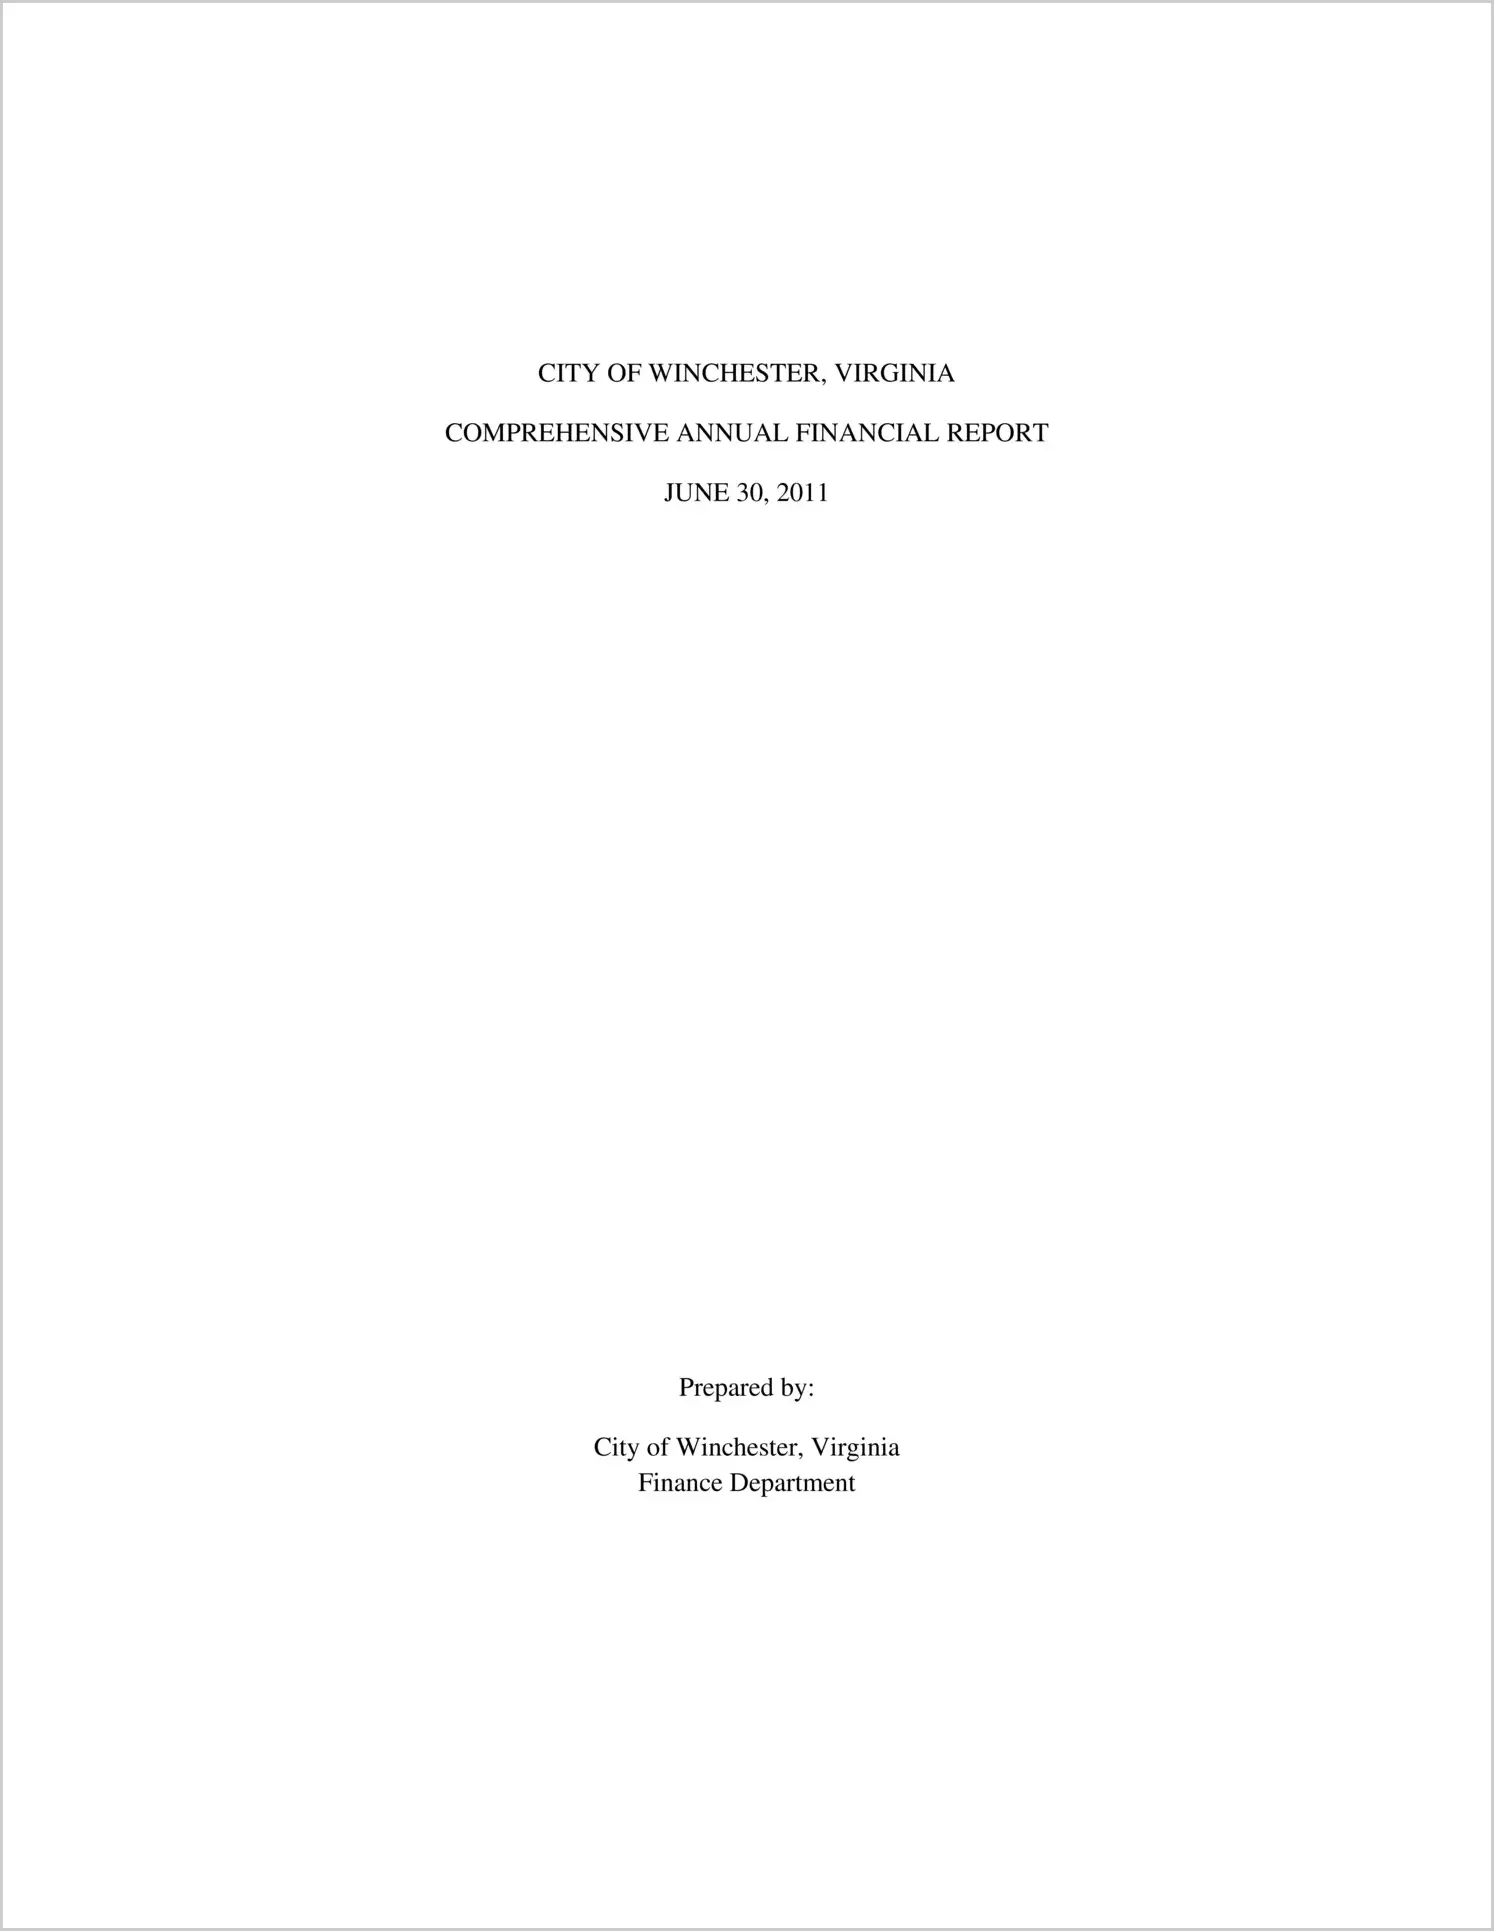 2011 Annual Financial Report for City of Winchester